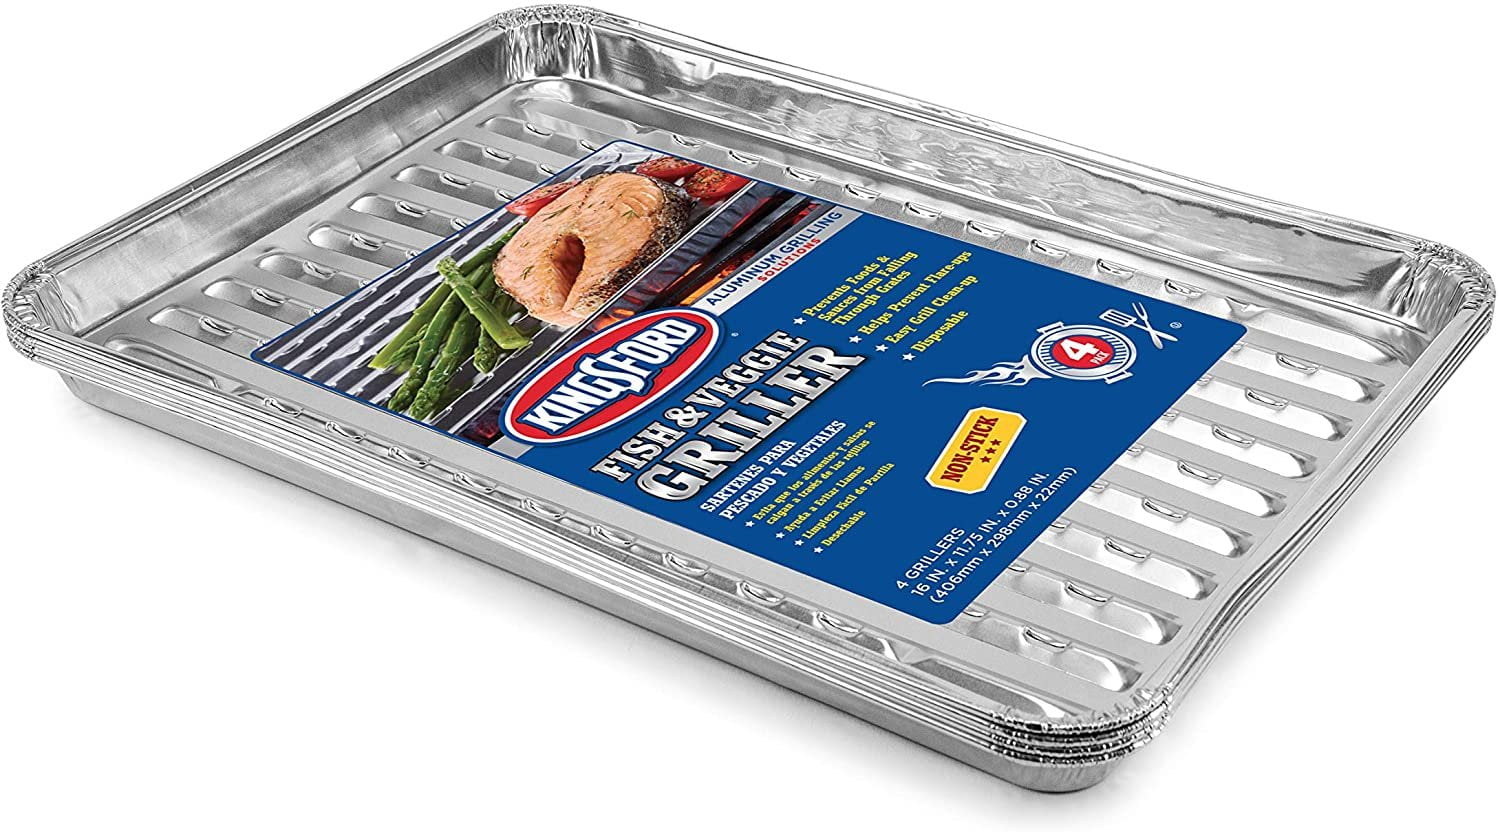 Kingsford 50-Pack Aluminum Foil Non-stick Grill Sheet(s) in the